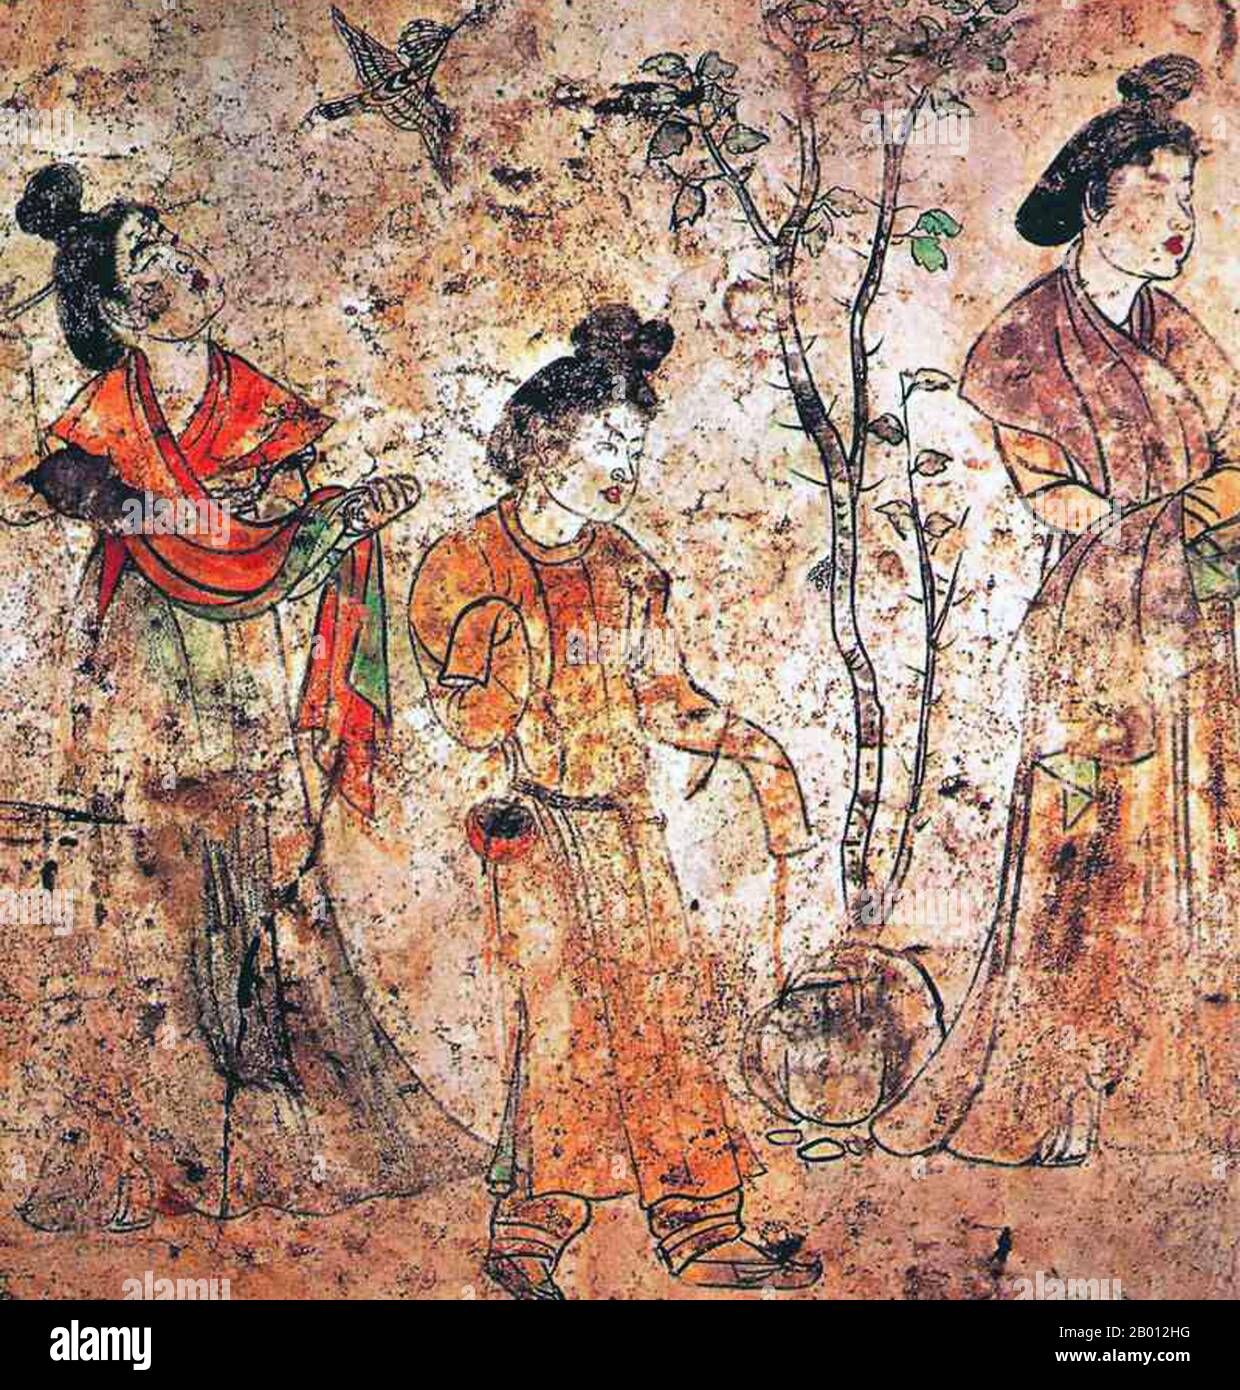 China: Qianling Tombs, Shaanxi; Court ladies walking in the palace gardens while a bird flies by. Tang Dynasty mural from the tomb of Gaozong's 6th son, Li Xian.  The Qianling Mausoleum is a Tang Dynasty (618–907) tomb site located in Qian County, Shaanxi province, China, and is 85 km (53 miles) northwest of Xi'an, the former Tang capital.  Built by 684 (with additional construction until 706), the tombs of the mausoleum complex house the remains of various members of the royal Li family. This includes Emperor Gaozong of Tang (r. 649–683), as well as his wife, Empress Wu Zetian (r. 690-705). Stock Photo